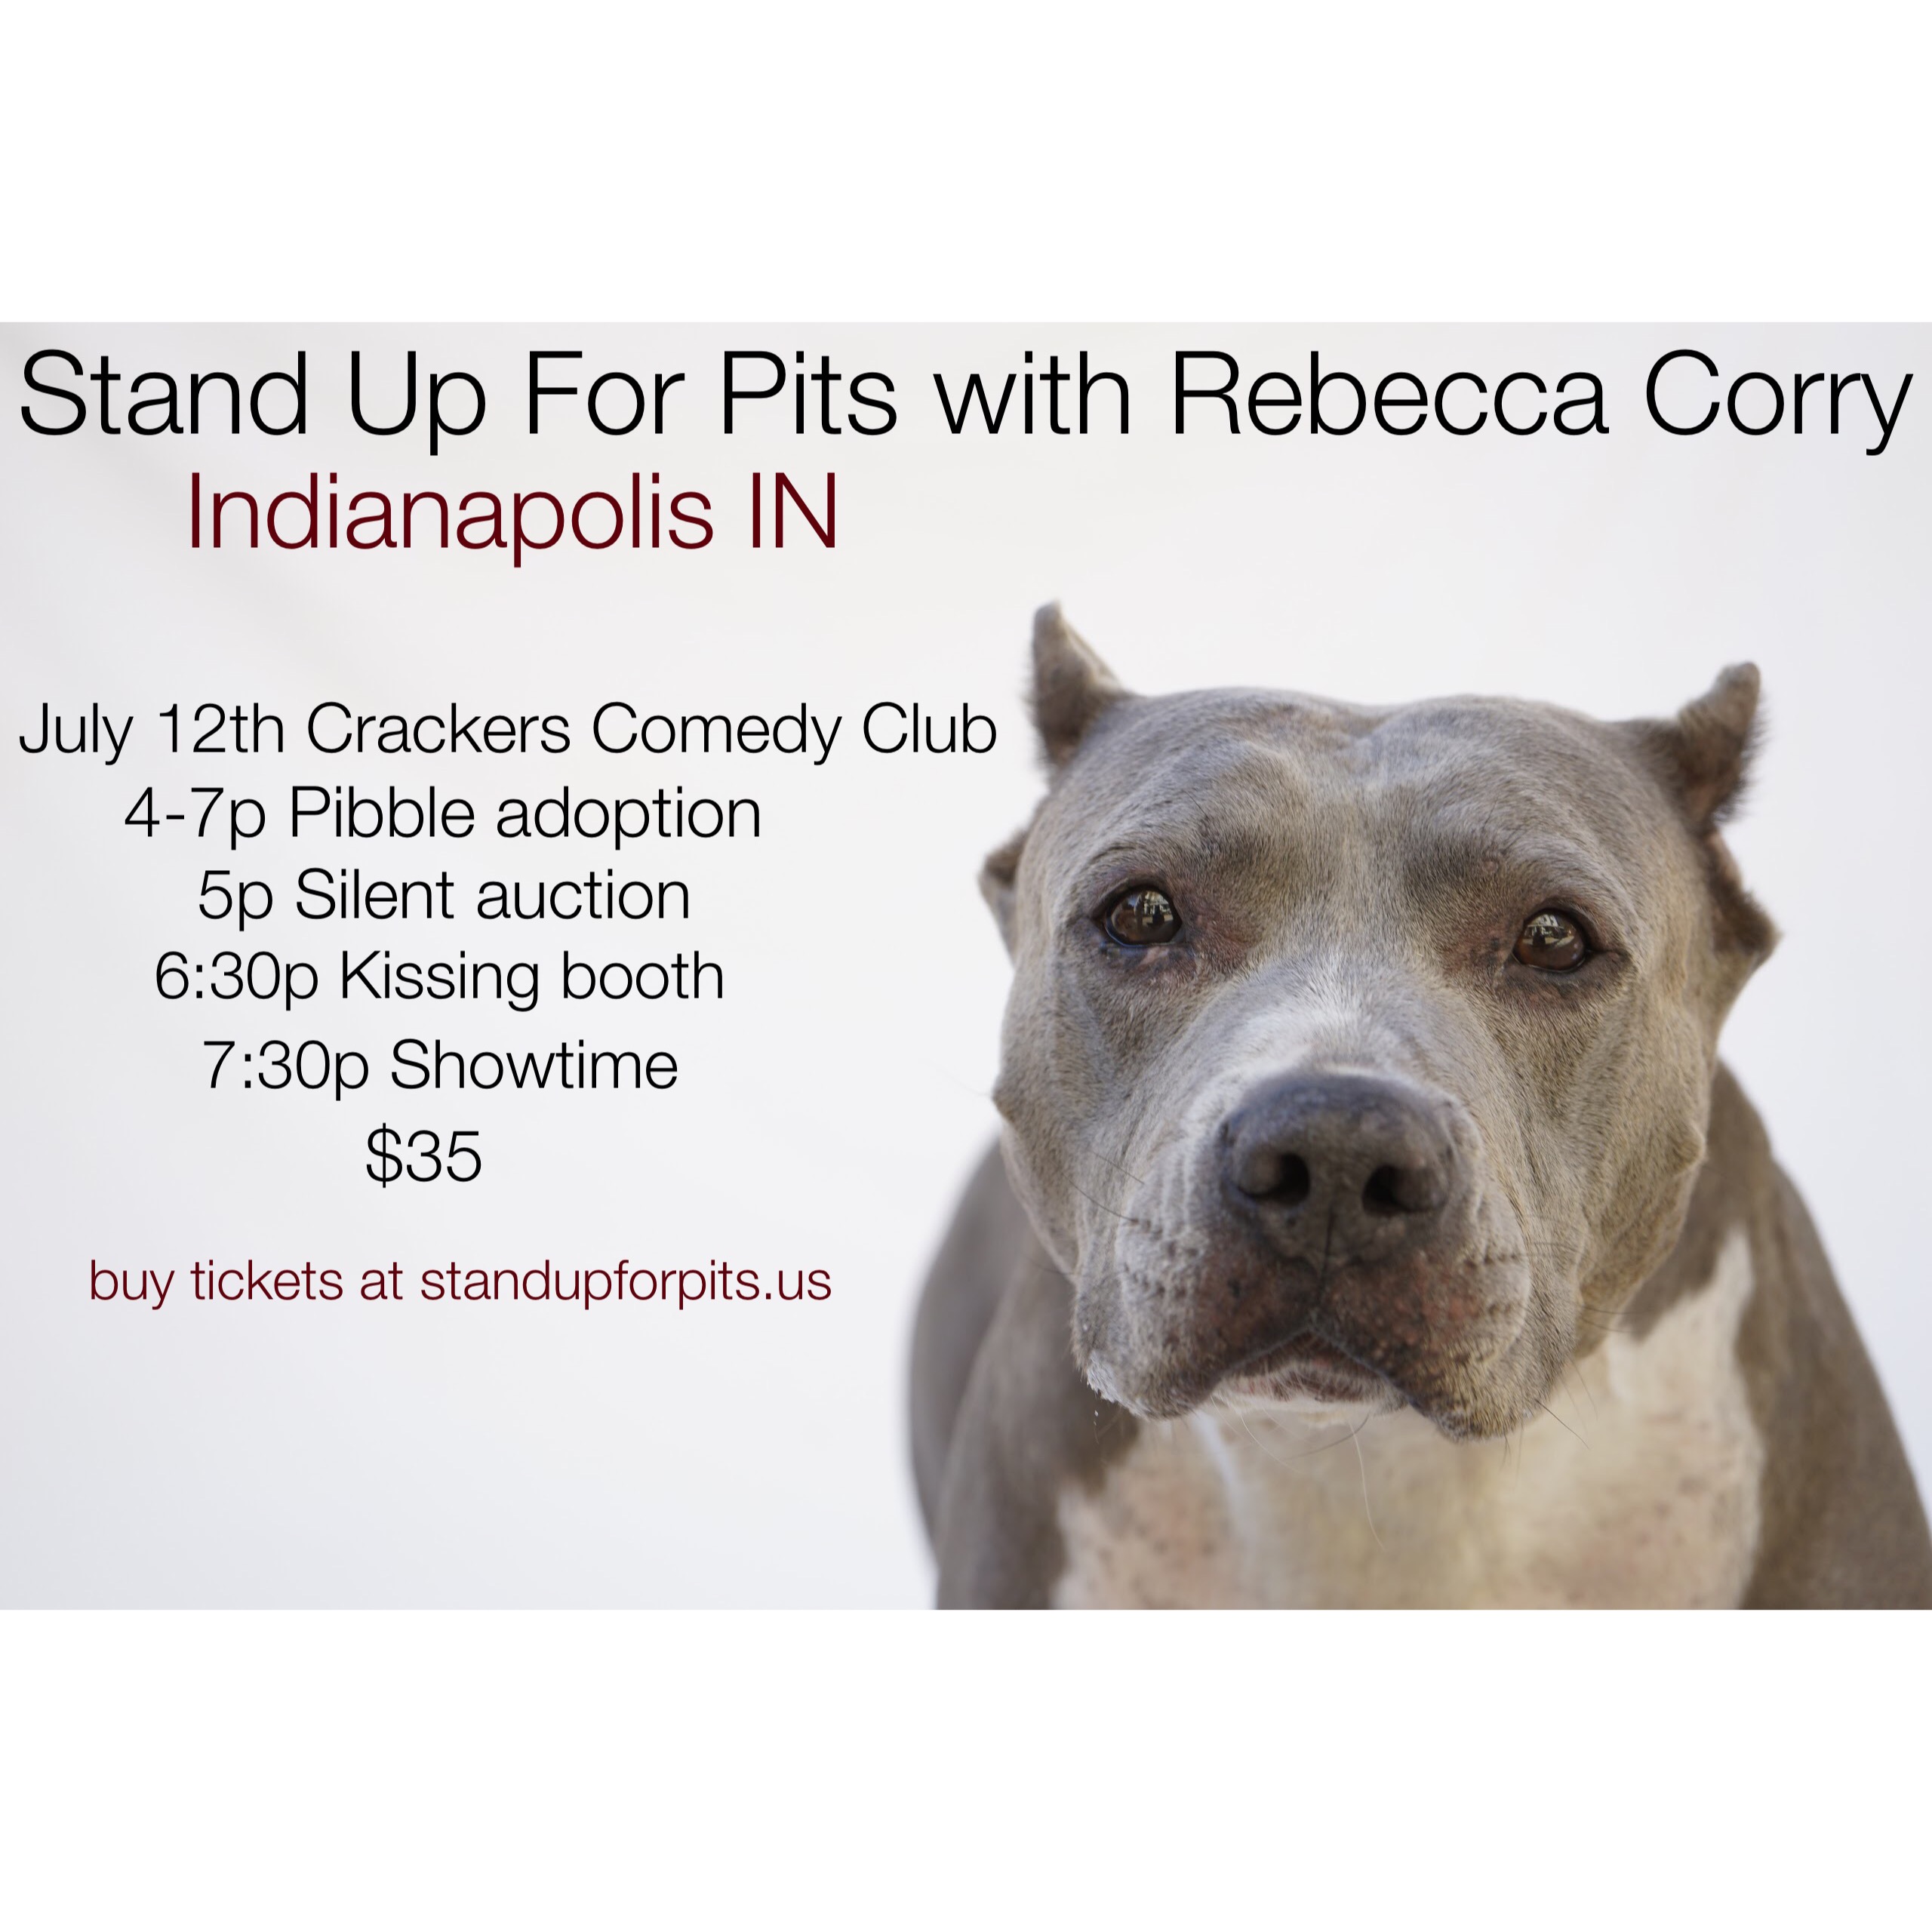 CASA Del toro chosen to participate in indy’s stand up for pits!